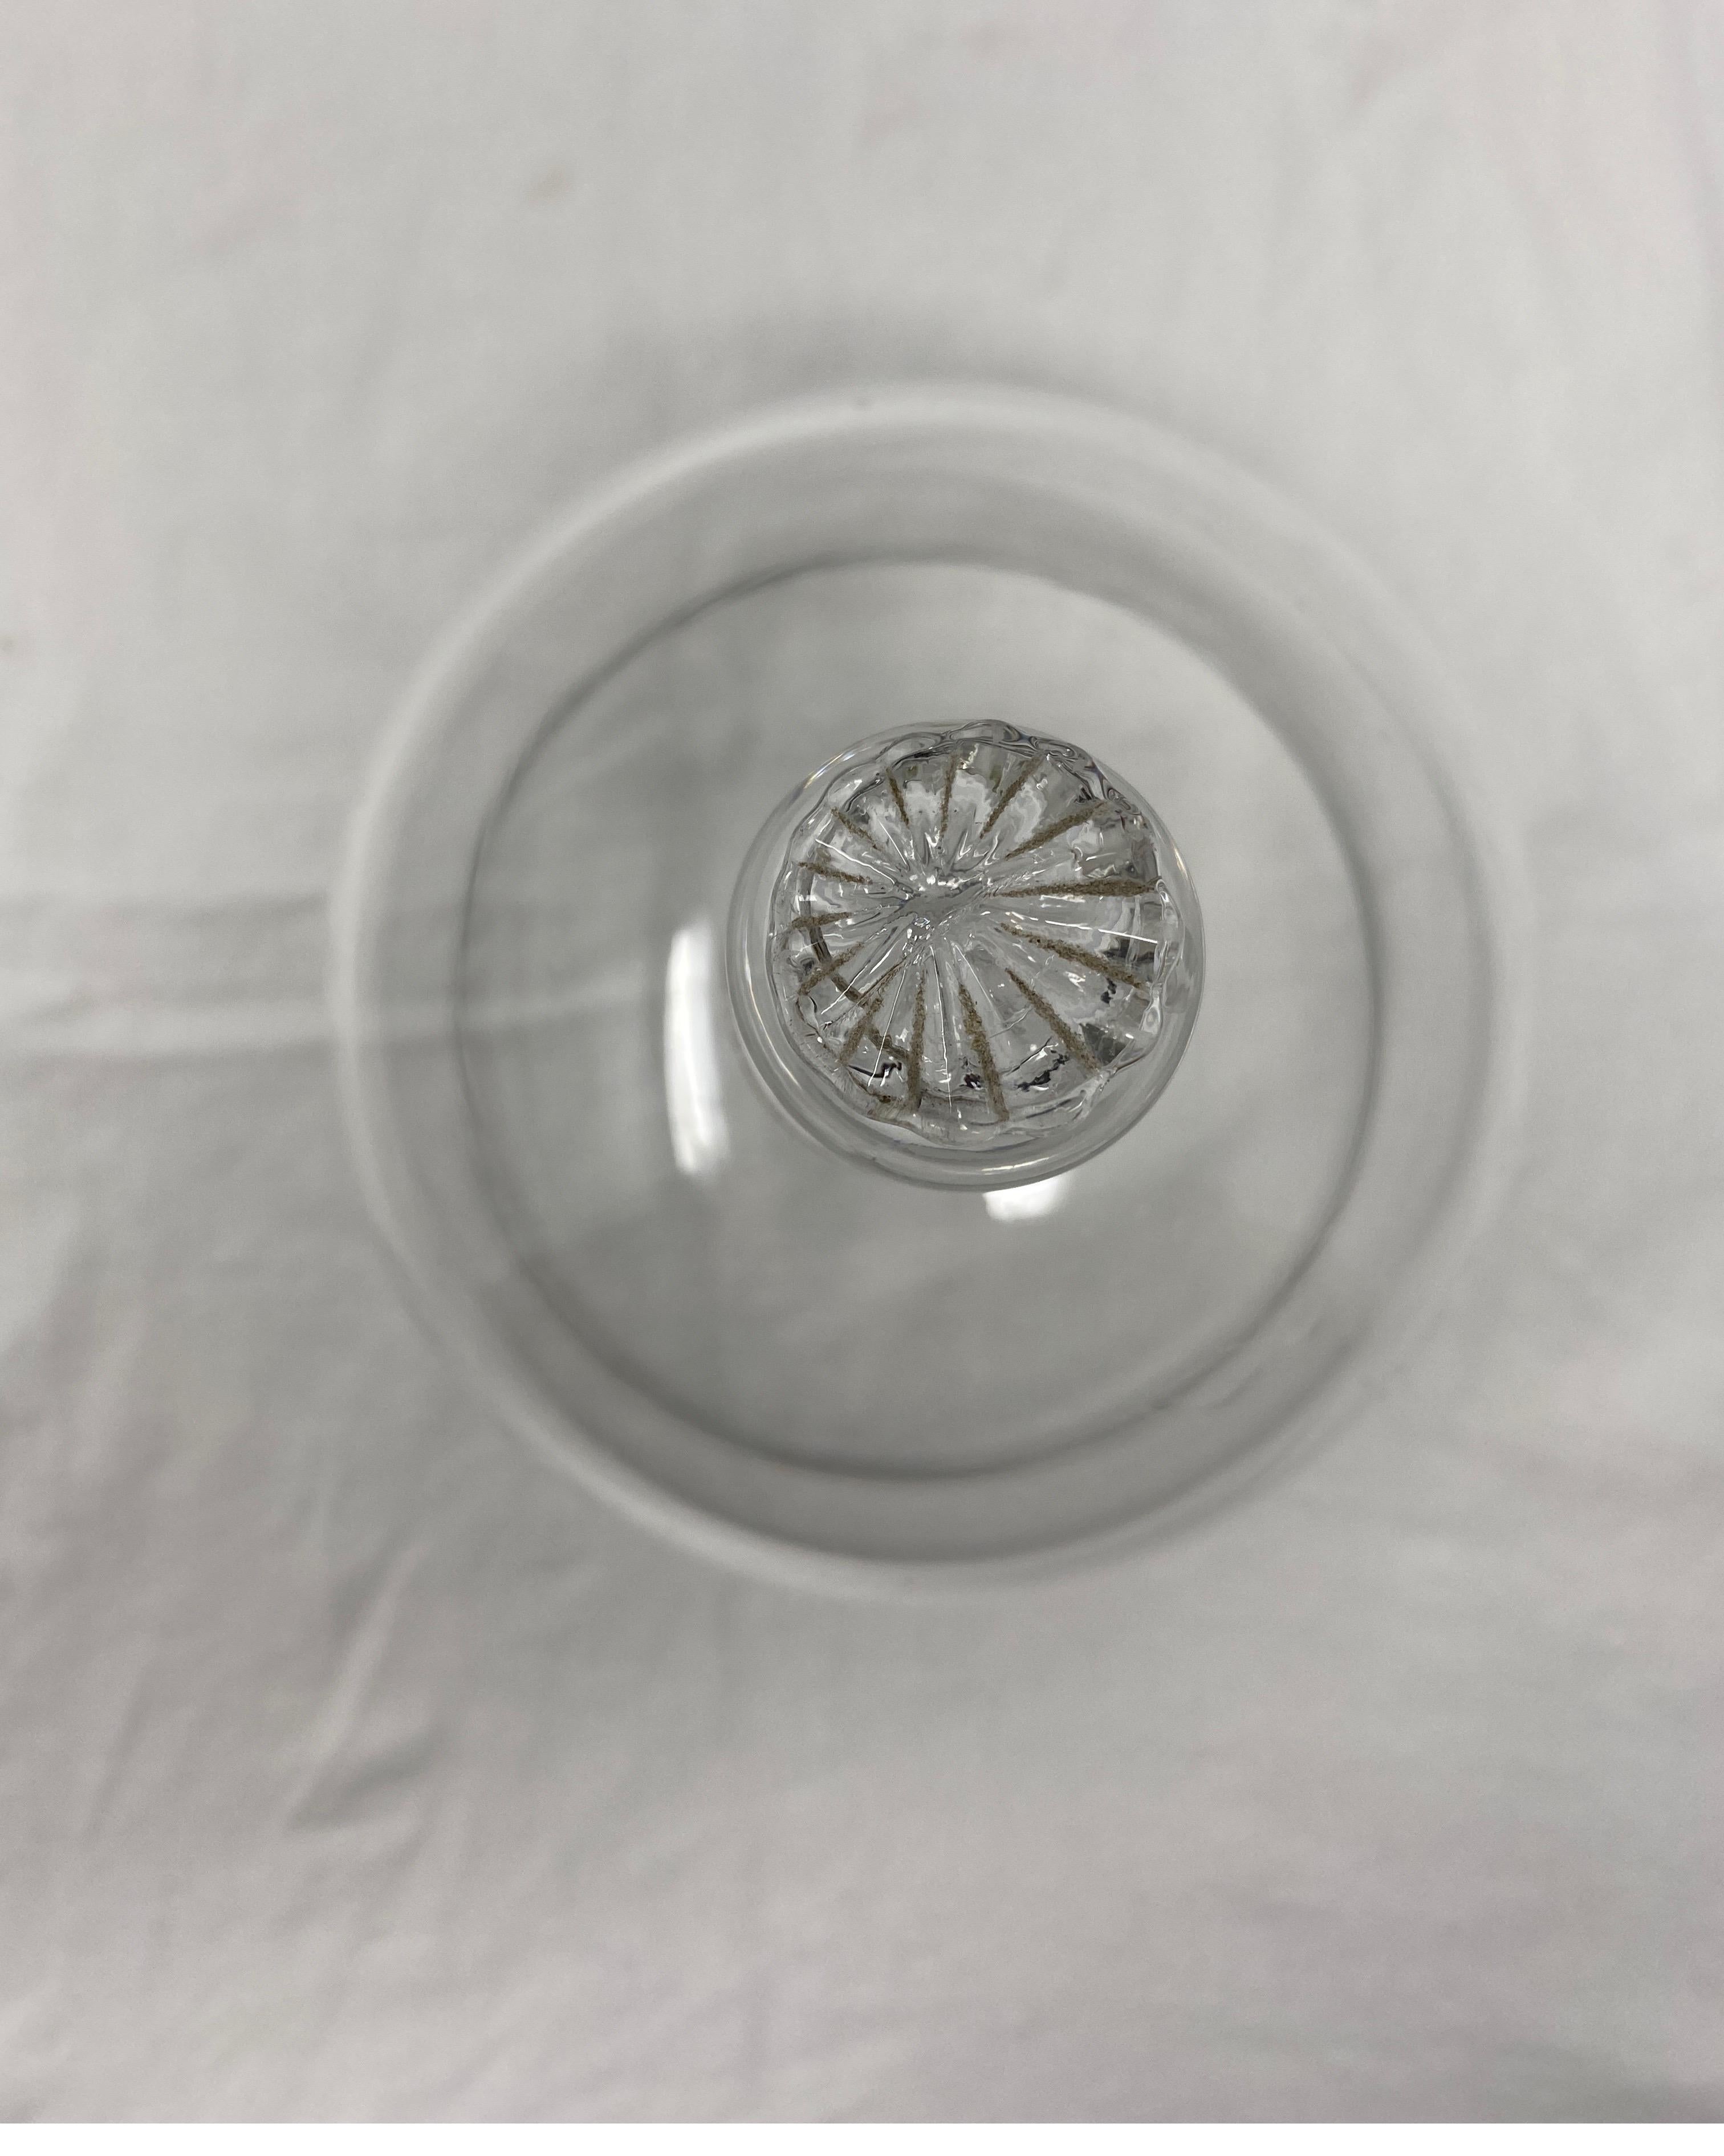 French antique glass dome cloche with a solid glass knob handle. Smooth and polished glass, these were used in French cheese shop's and patisseries to cover and display cheeses and baked goods.
 